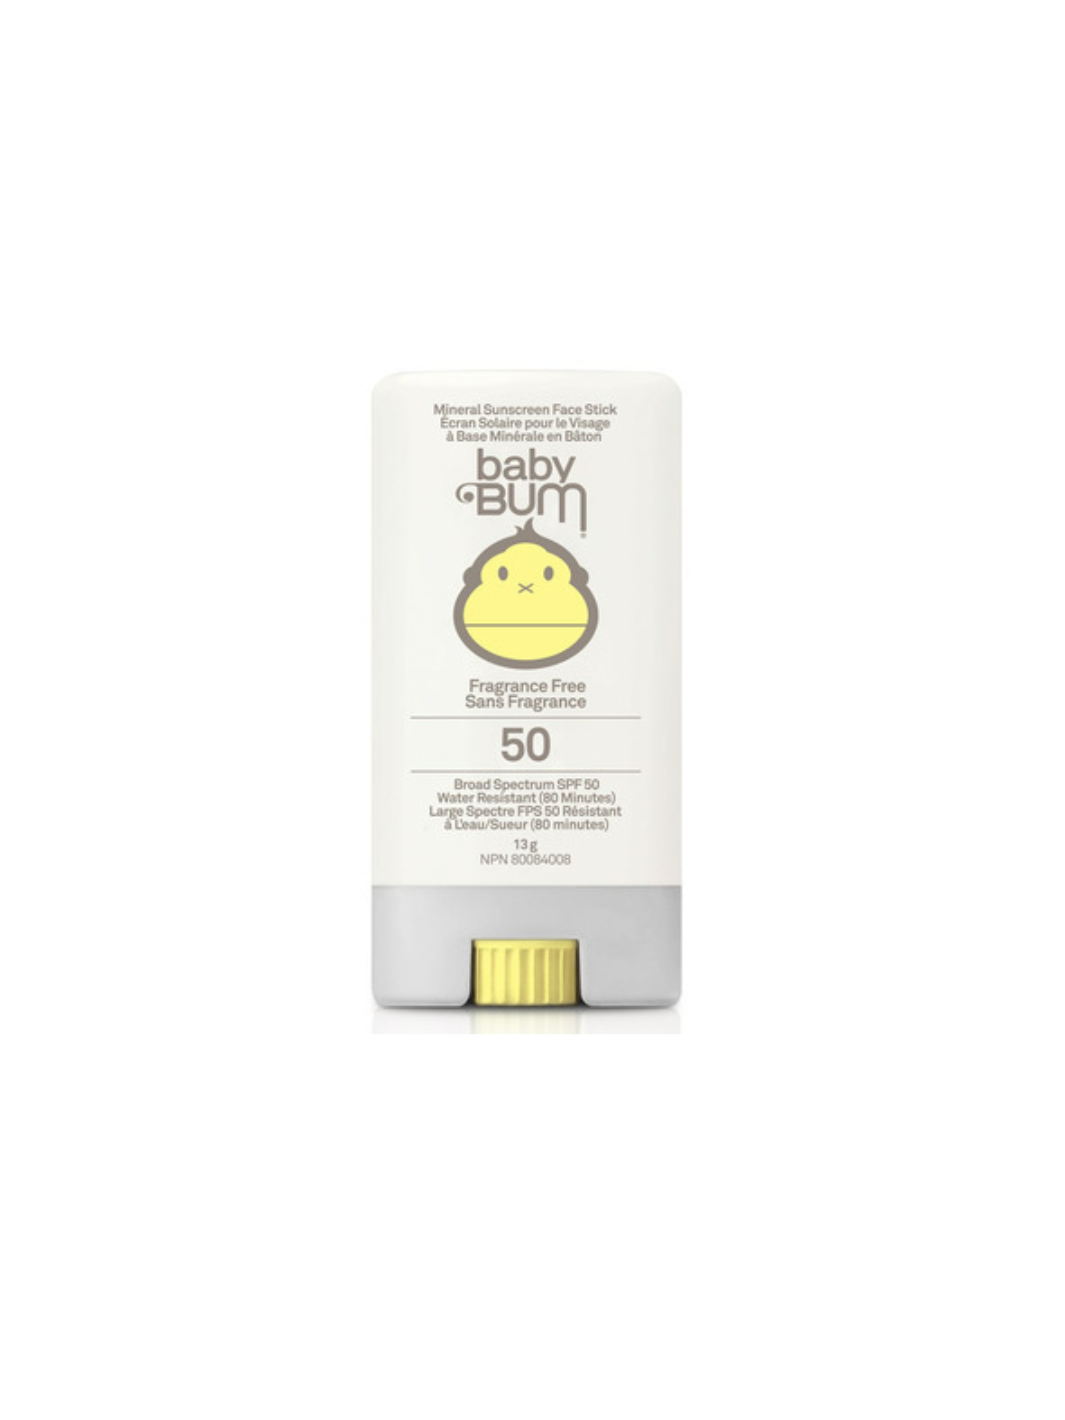 Baby Bum Mineral Sunscreen Face Stick SPF 50 Fragrance Free - 13g